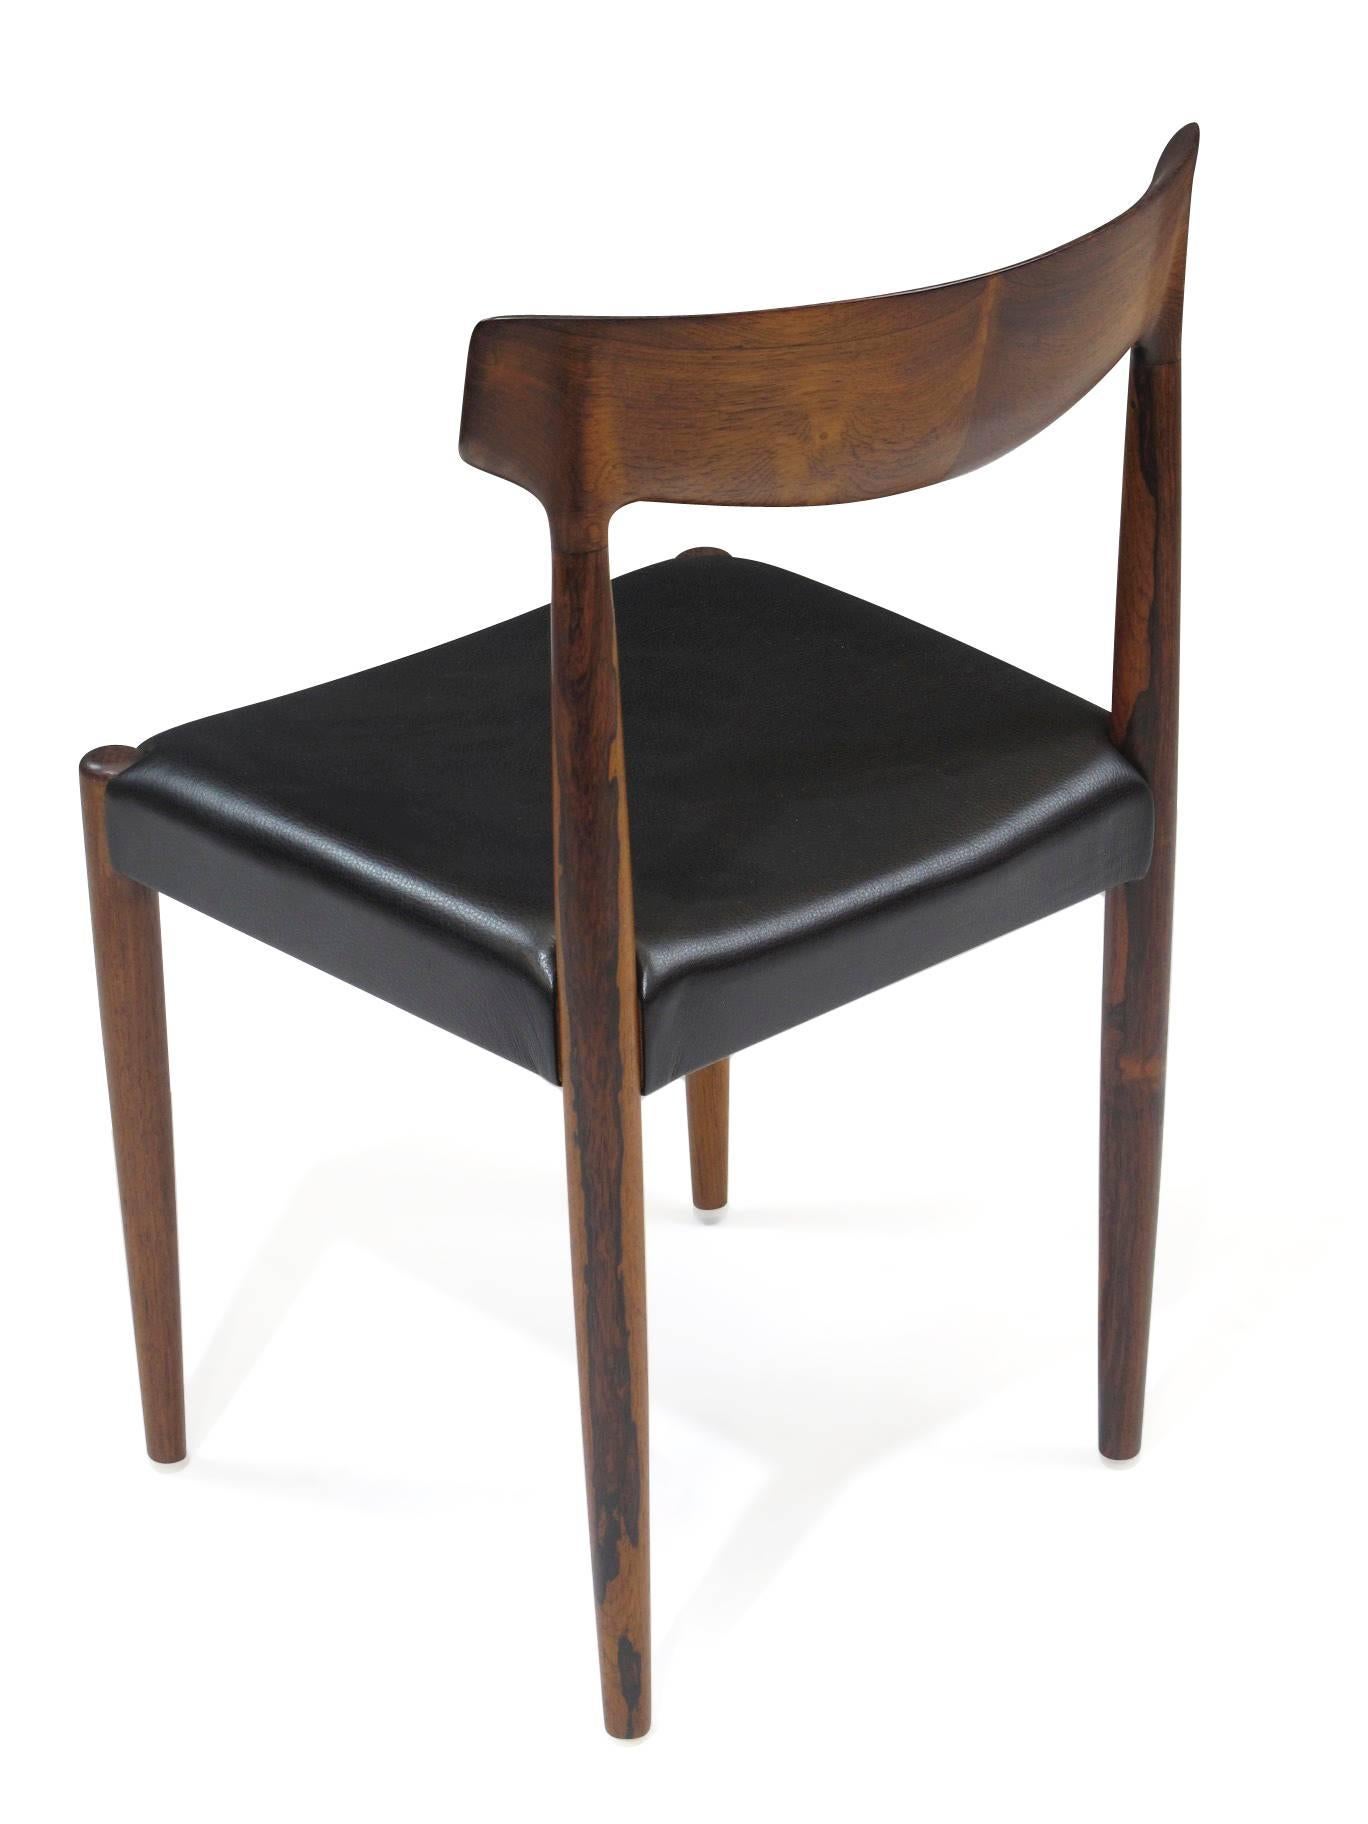 Mid-20th Century Knud Faerch Danish Rosewood Dining Chairs For Sale